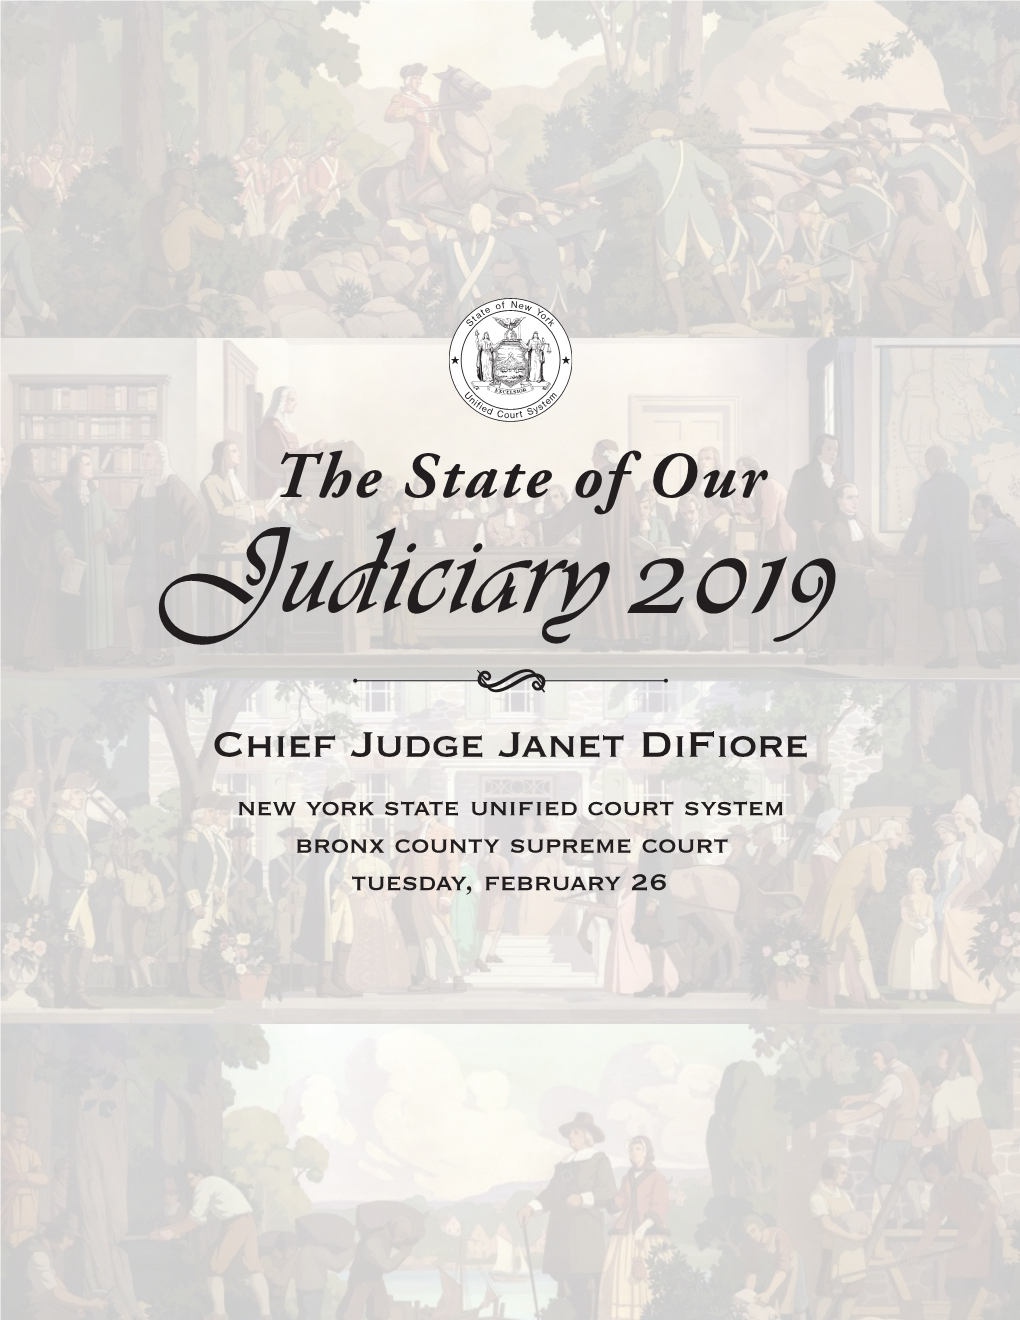 The State of Our Judiciary 2019